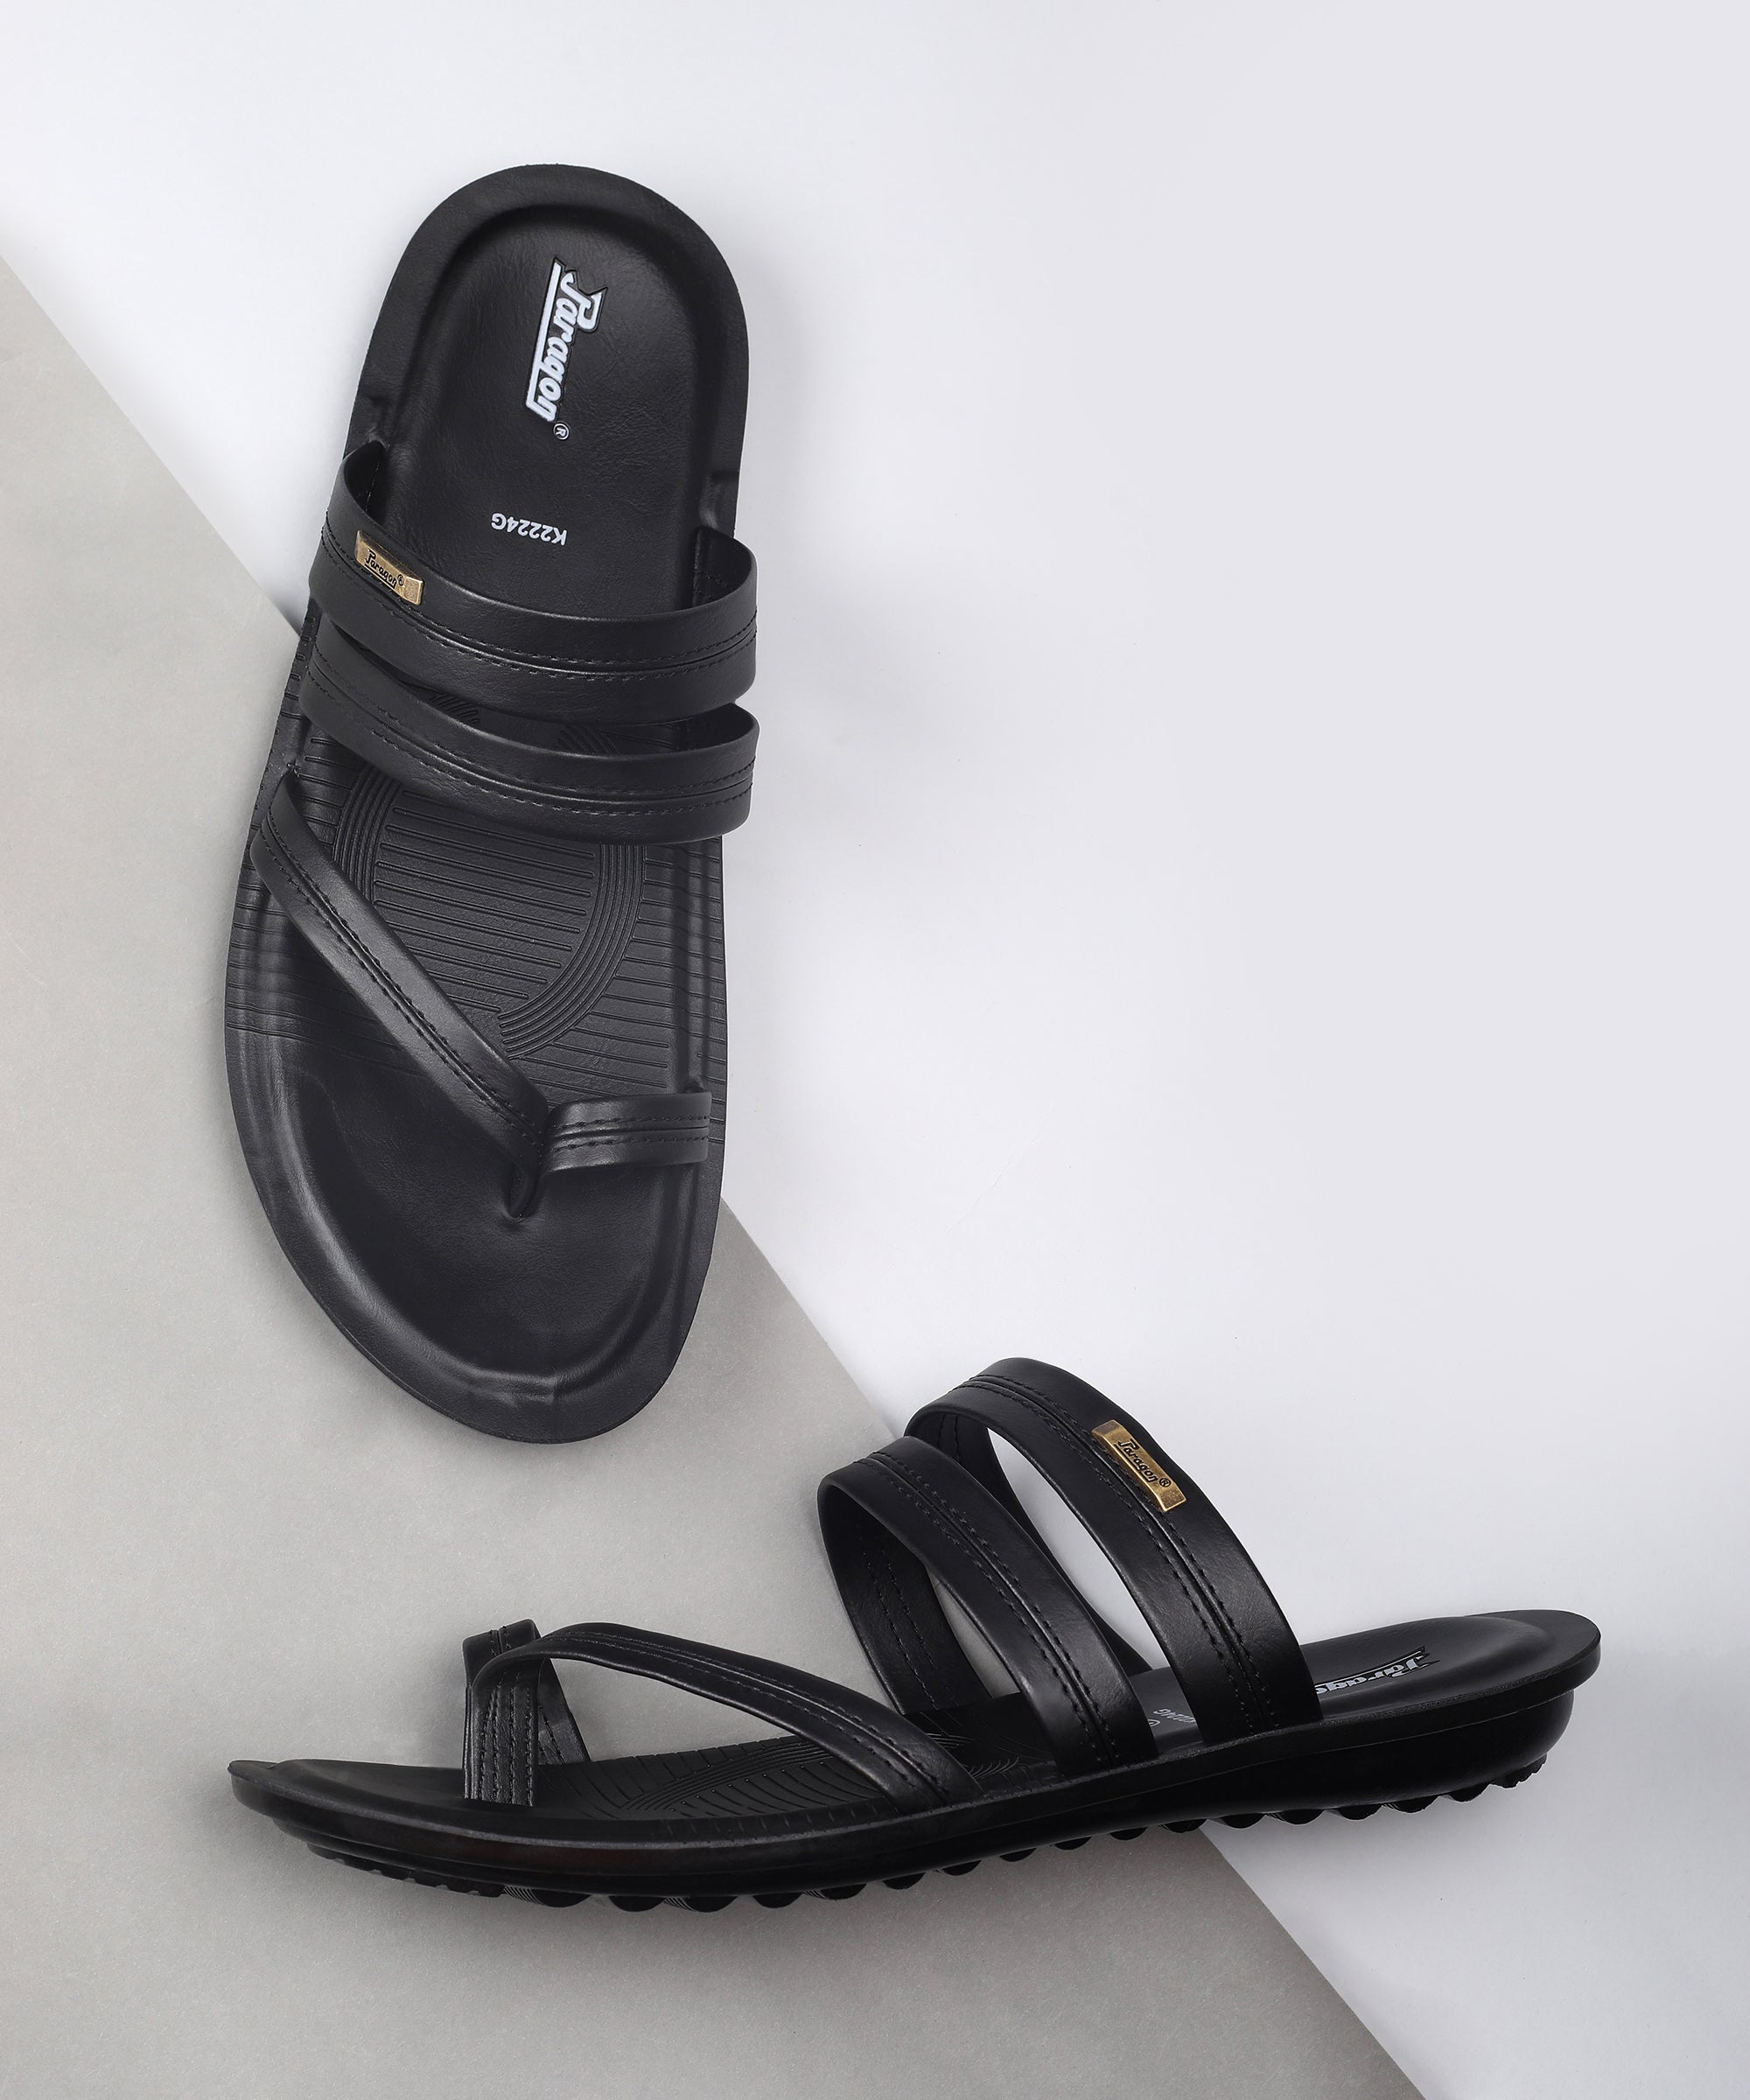 Paragon PUK2224G Men Stylish Sandals | Comfortable Sandals for Daily Outdoor Use | Casual Formal Sandals with Cushioned Soles